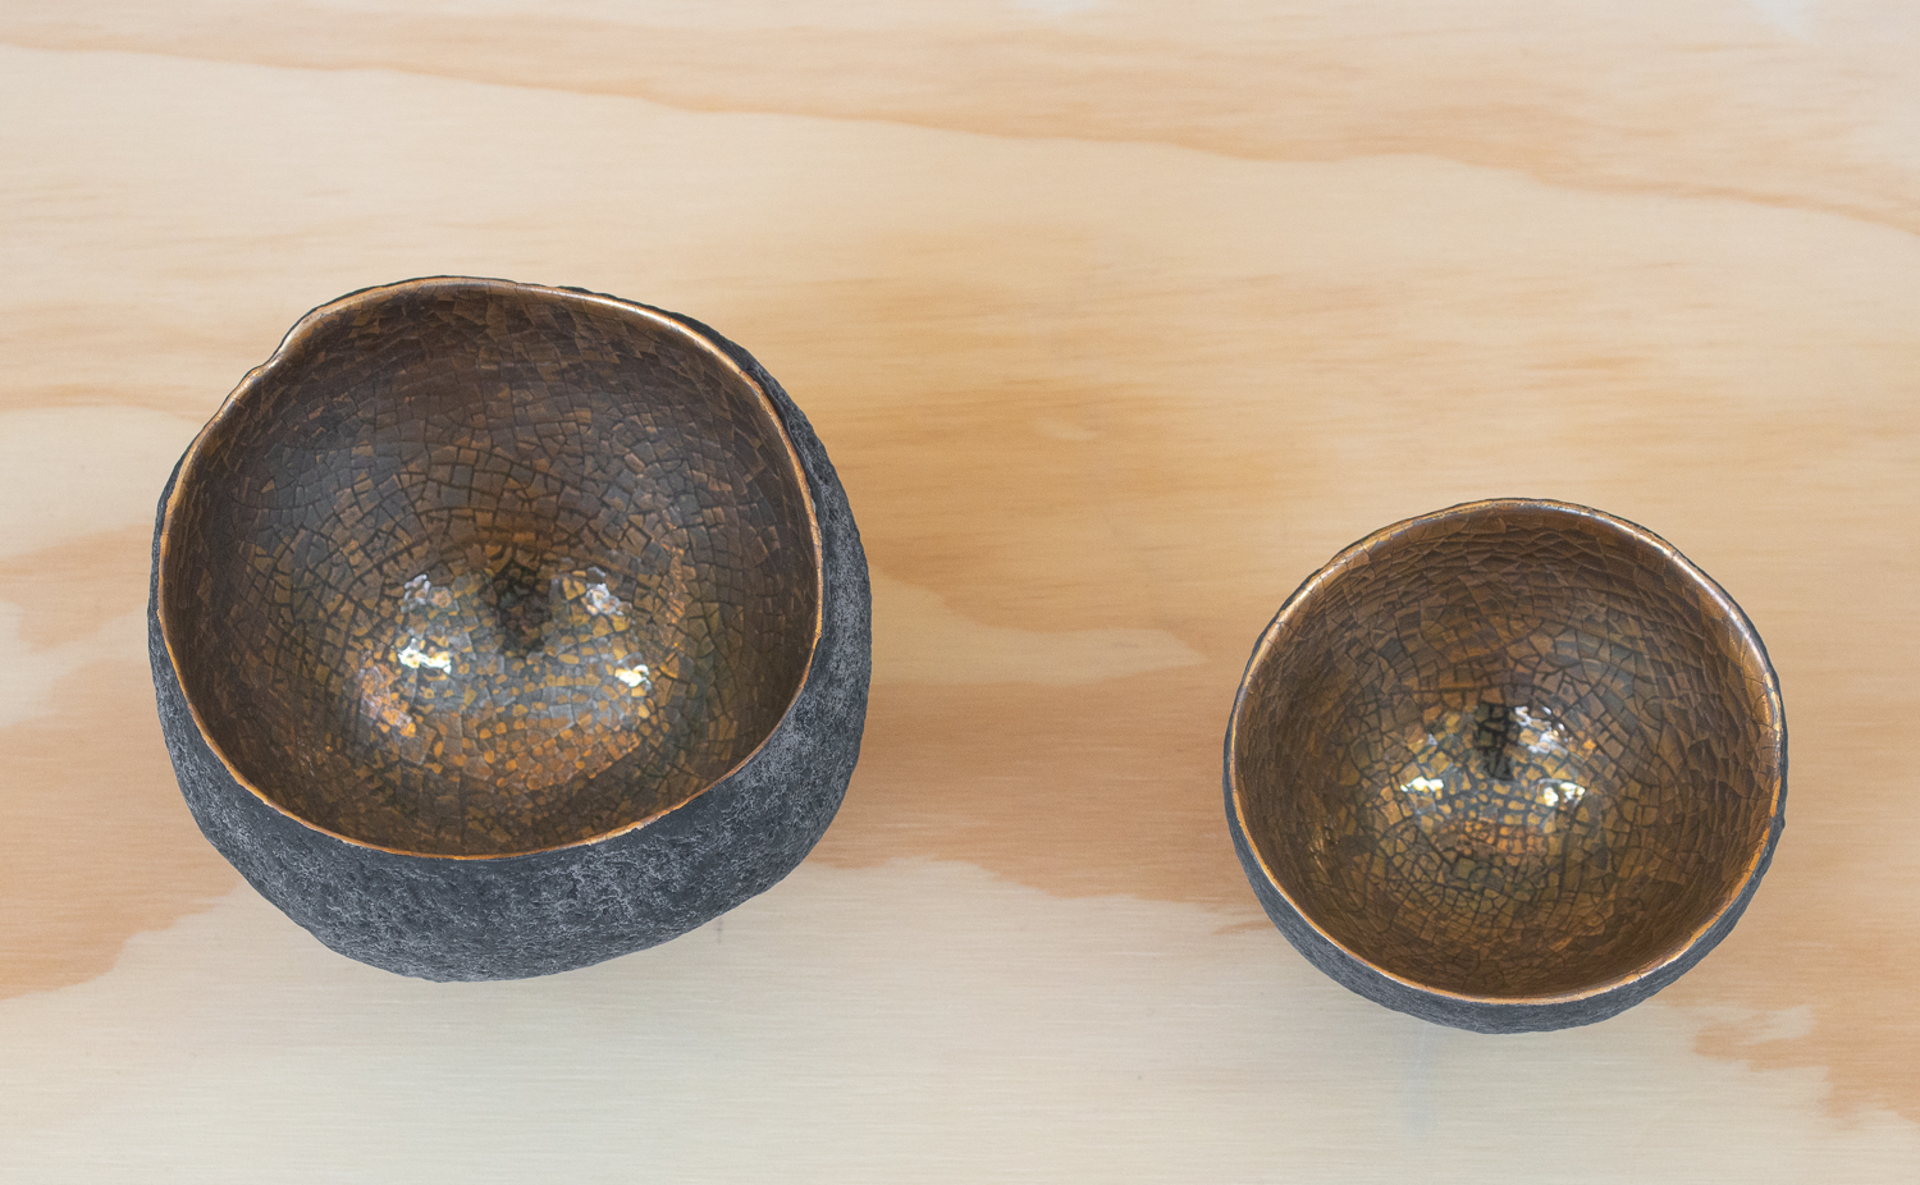 Bowls with platinum and gold by Cristina Salusti